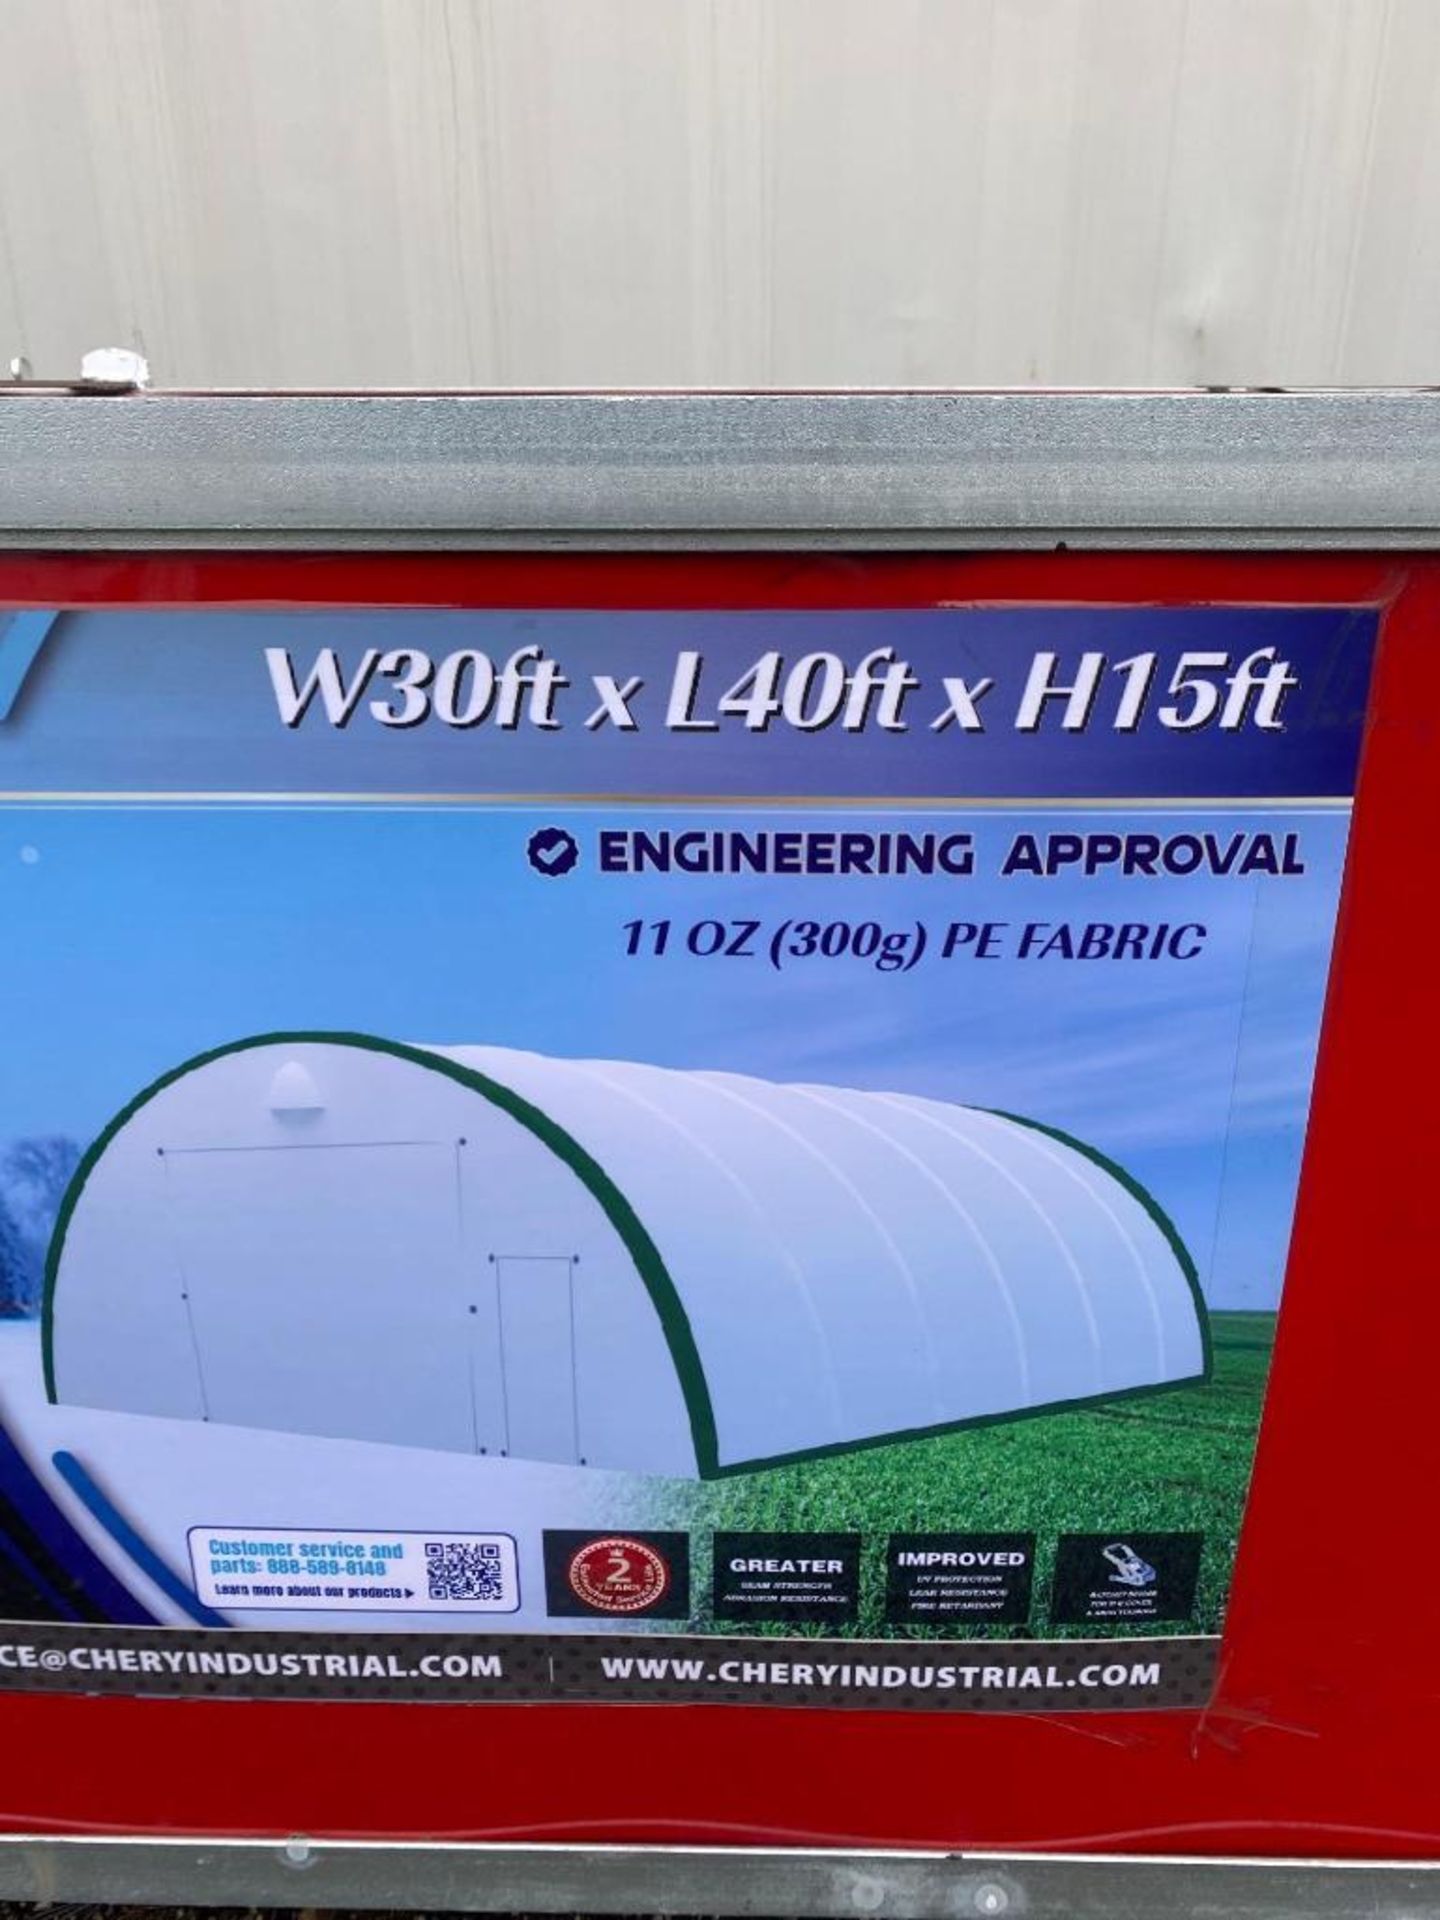 New Chery Industrial 30ft x 40ft x 15ft Outdoor Storage Shelter Model 304015R